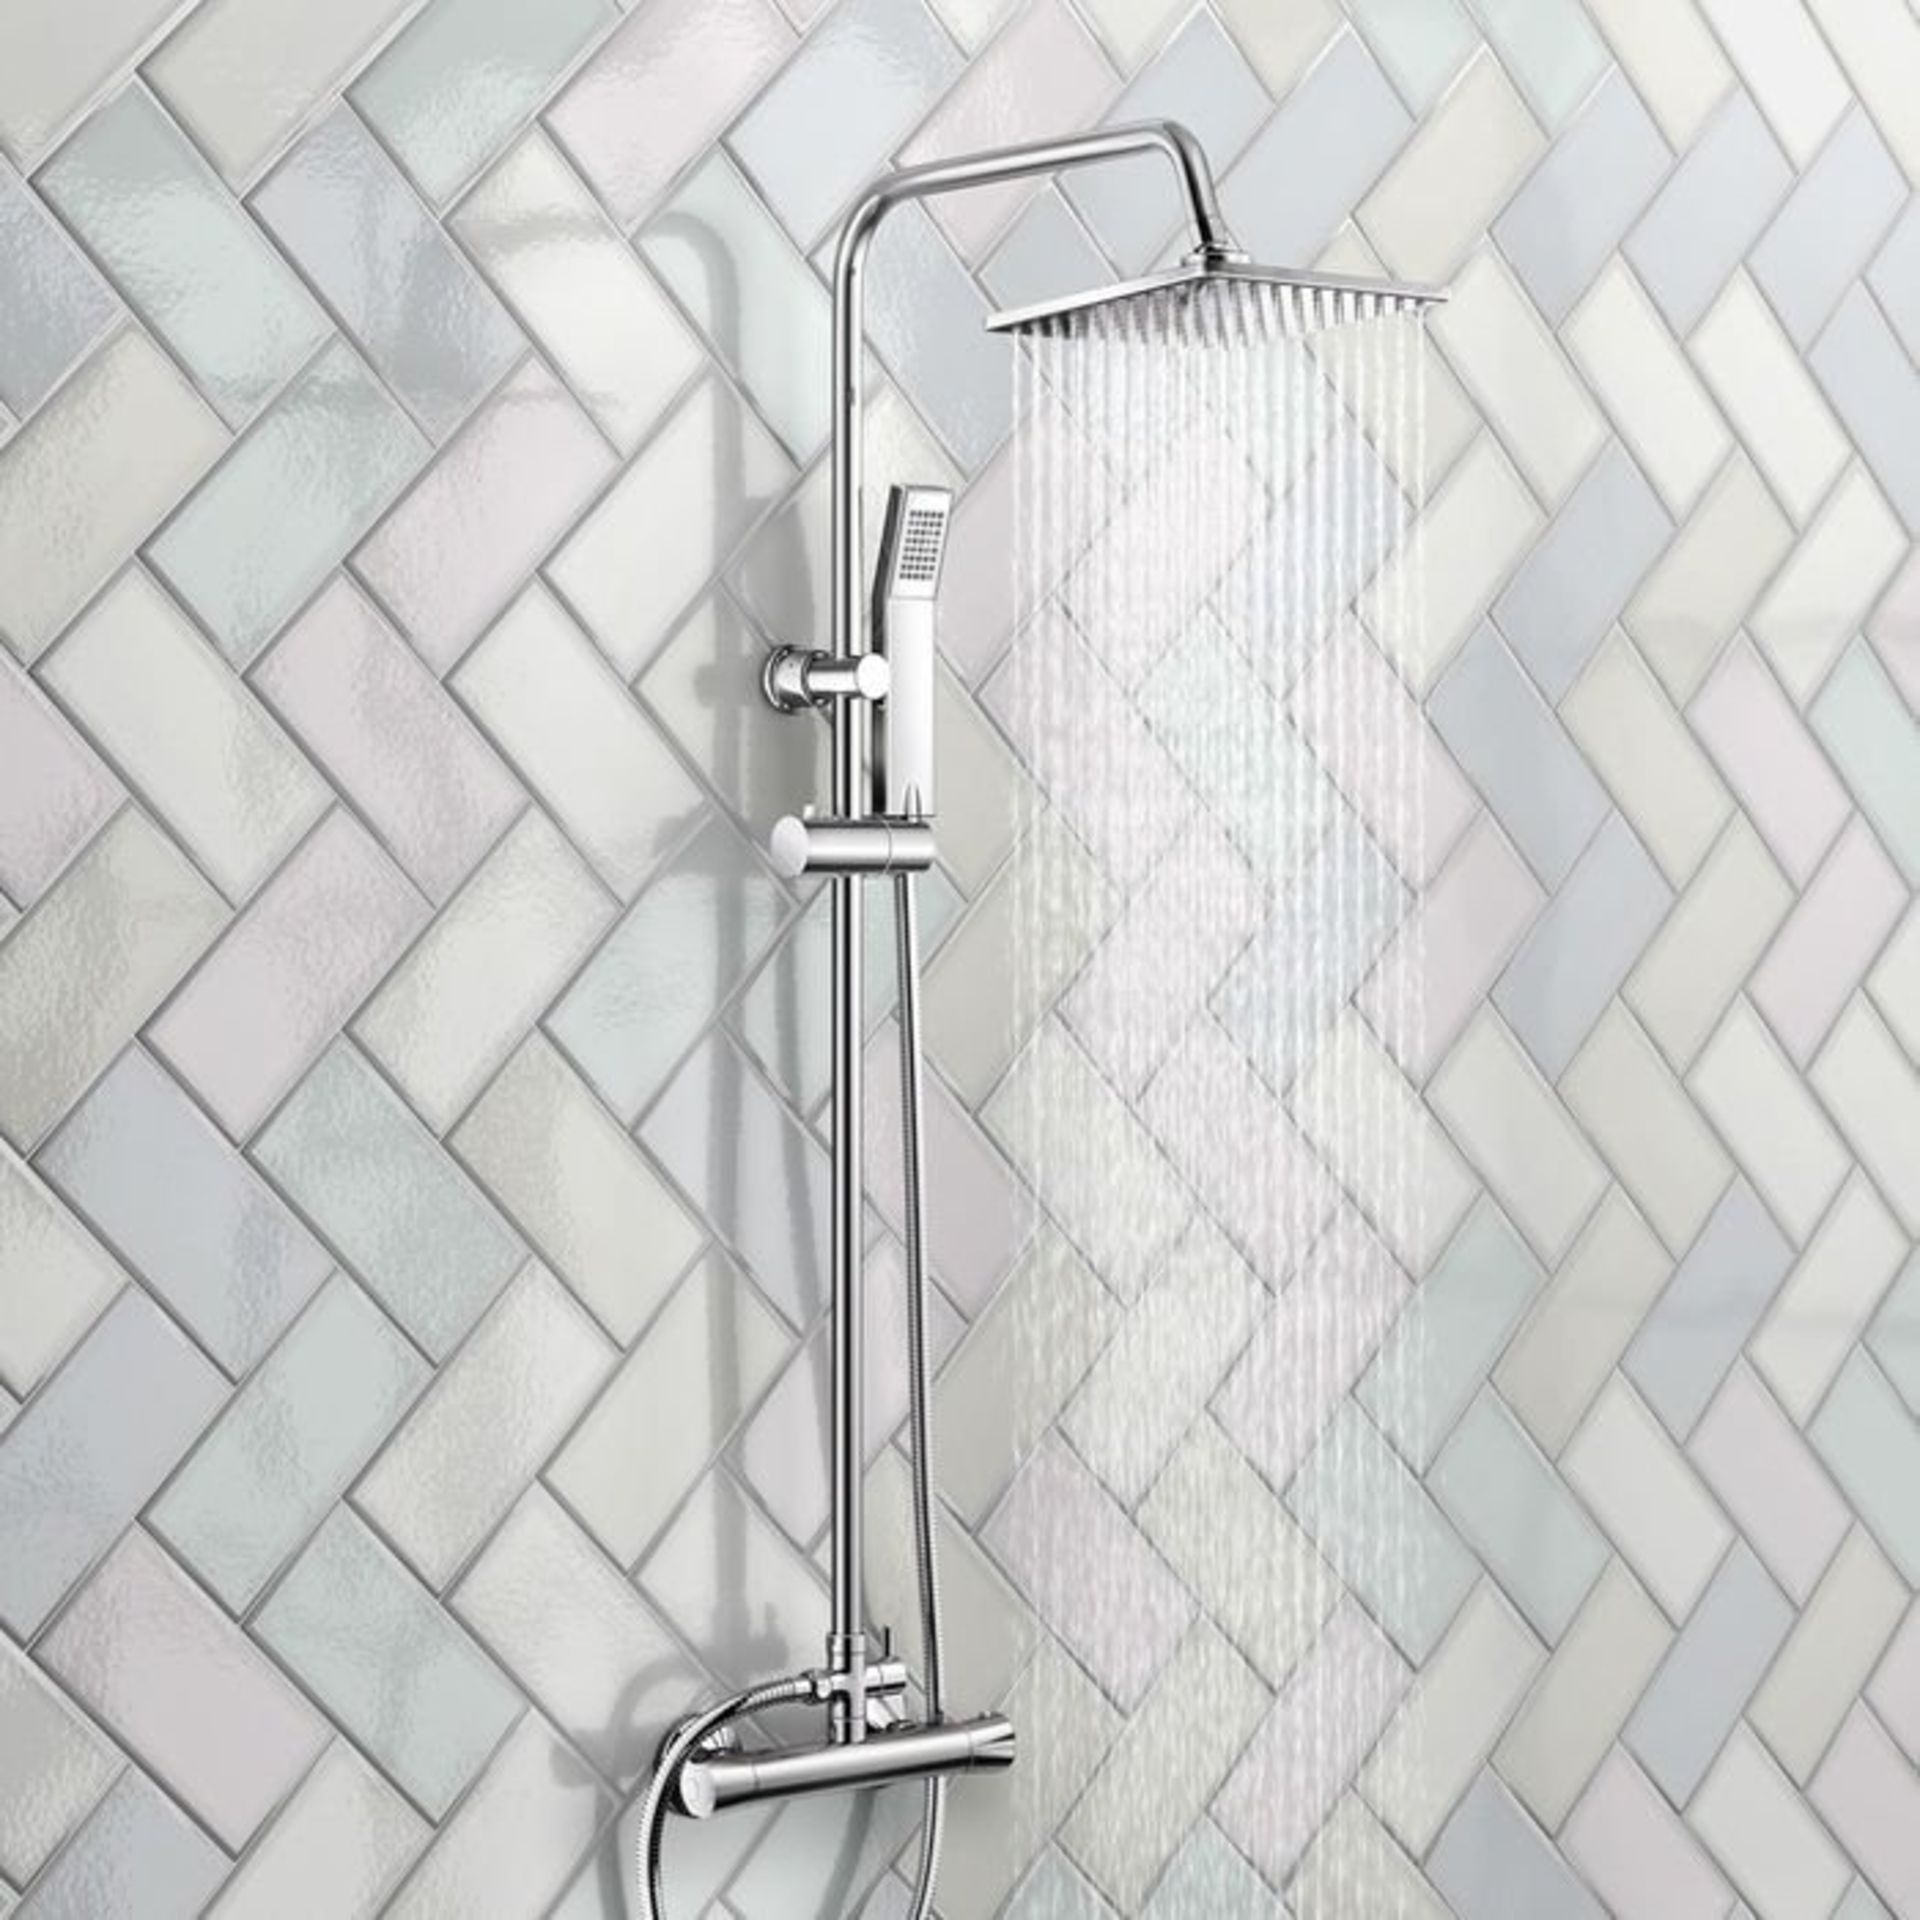 (J156) 200mm Square Head Thermostatic Exposed Shower Kit & Hand Held. We love this because it